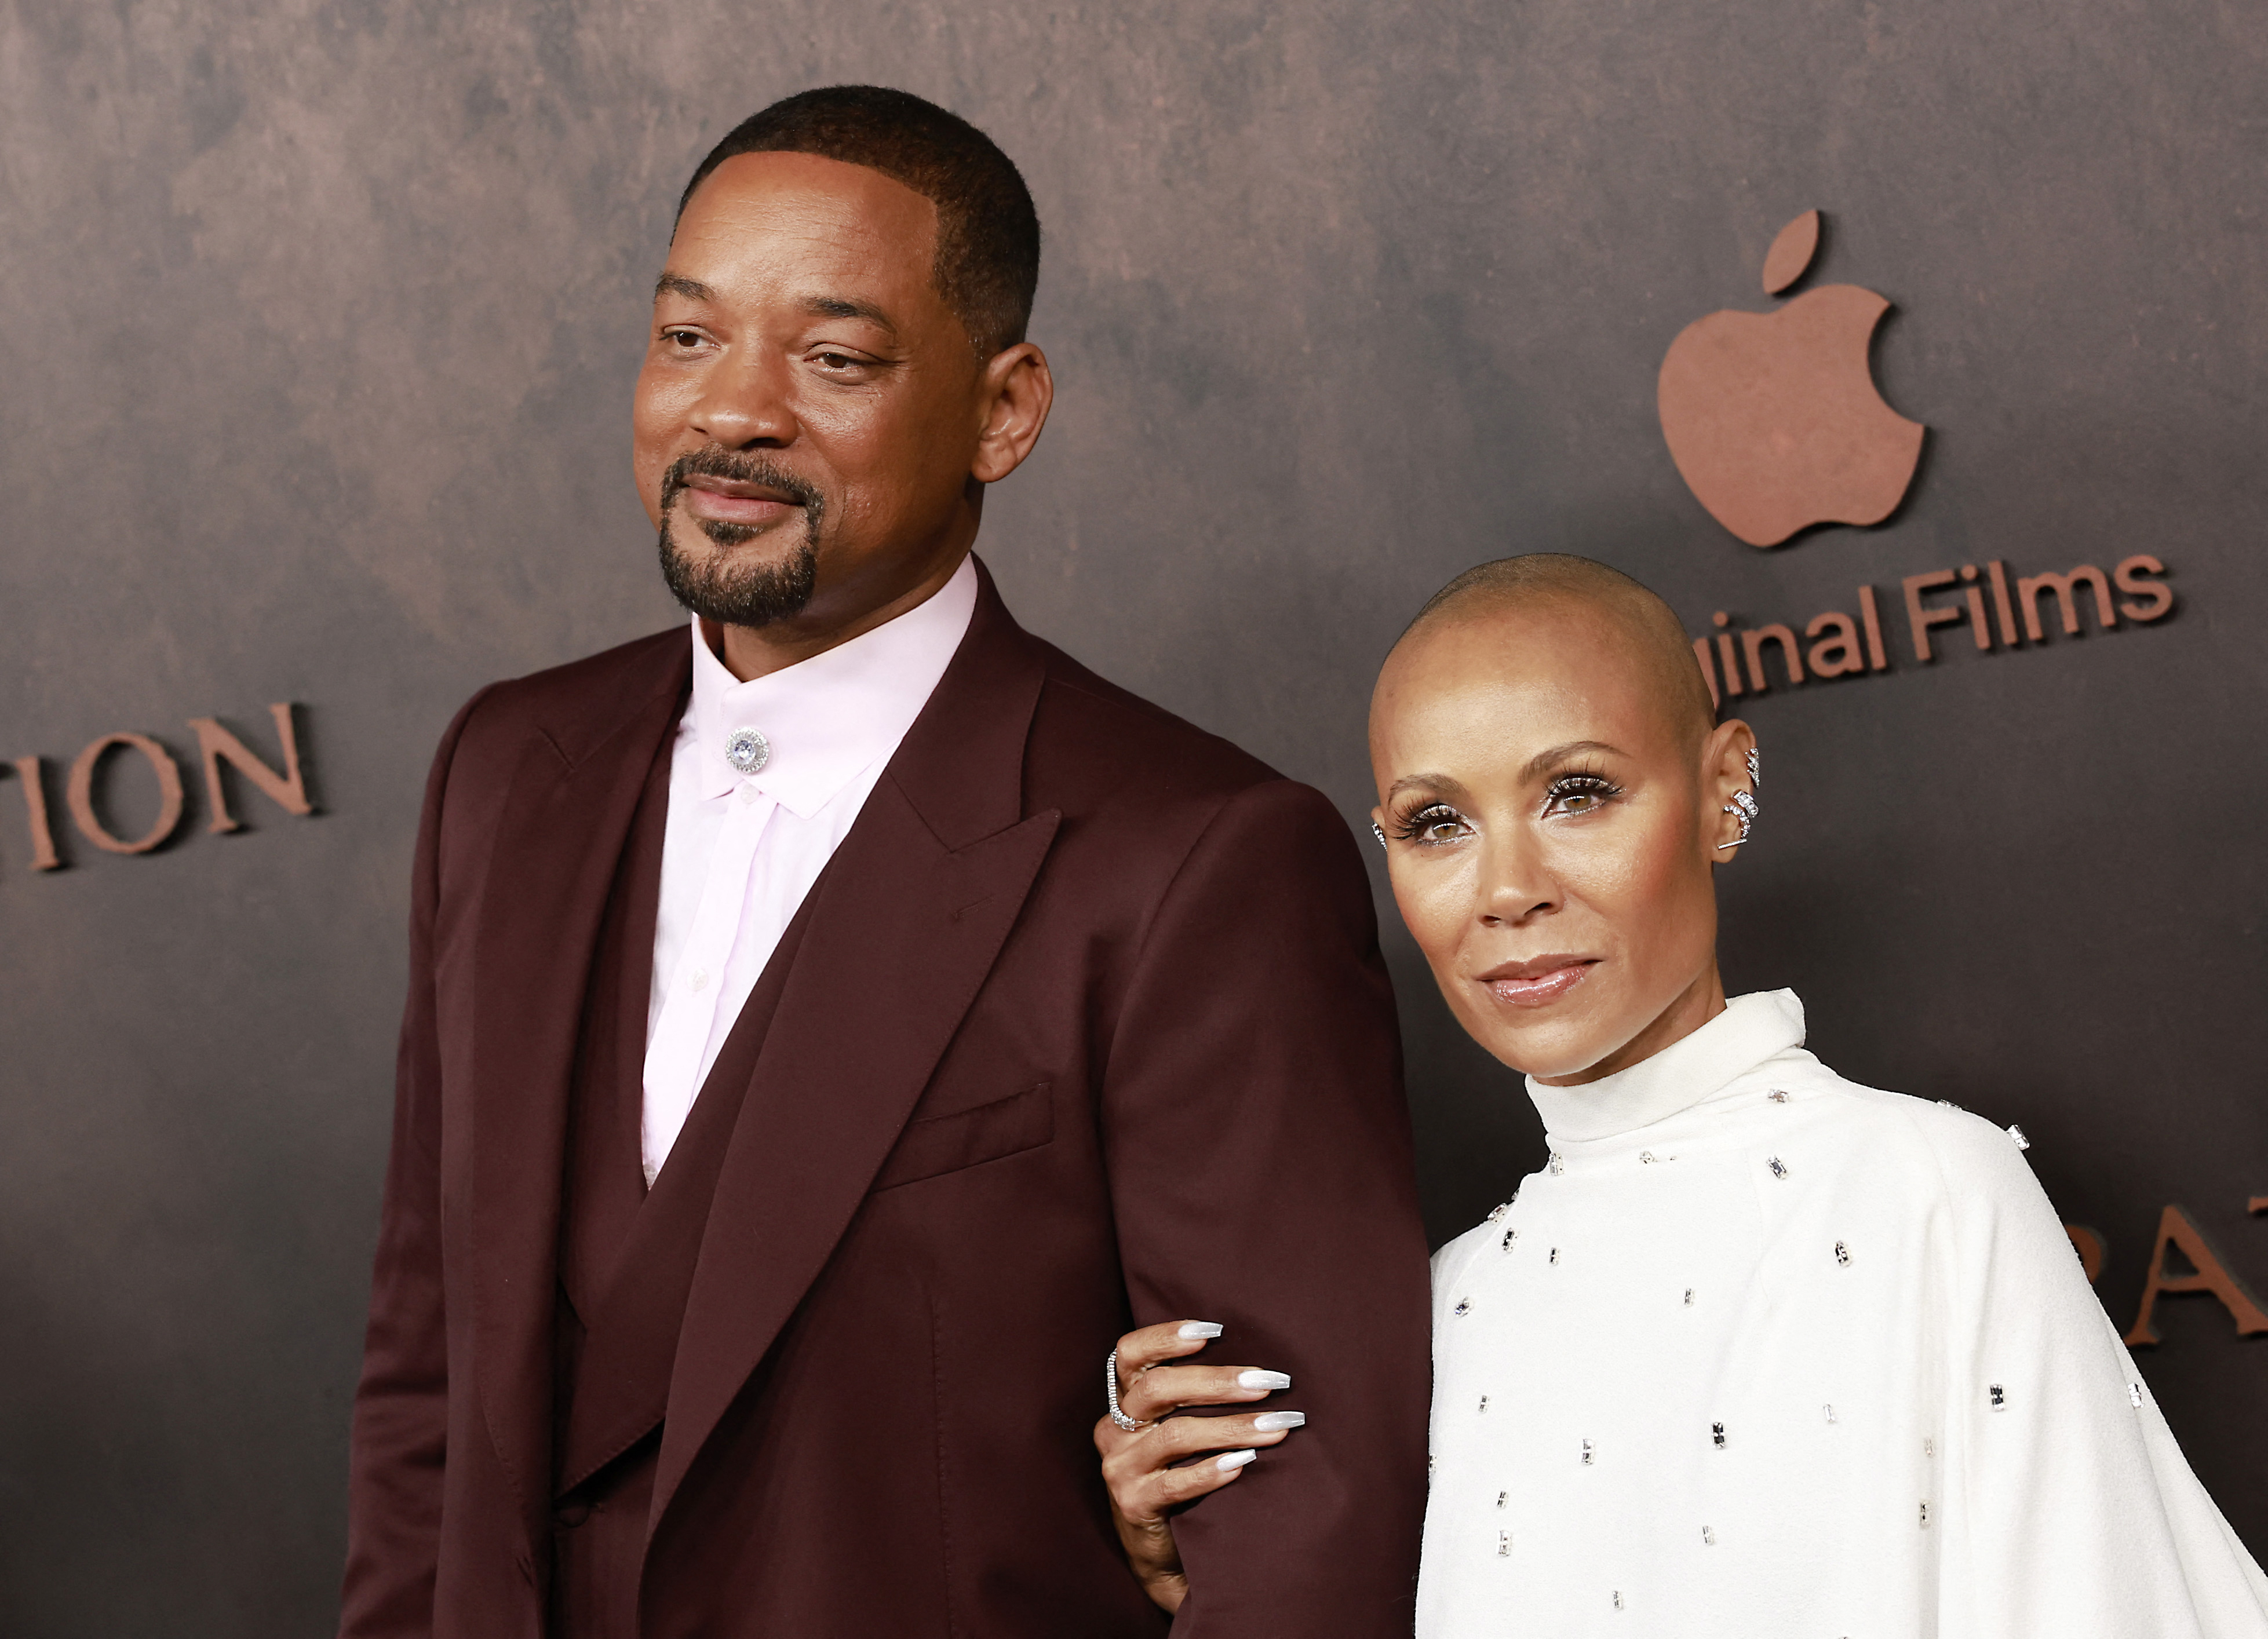 Will and Jada at a media event